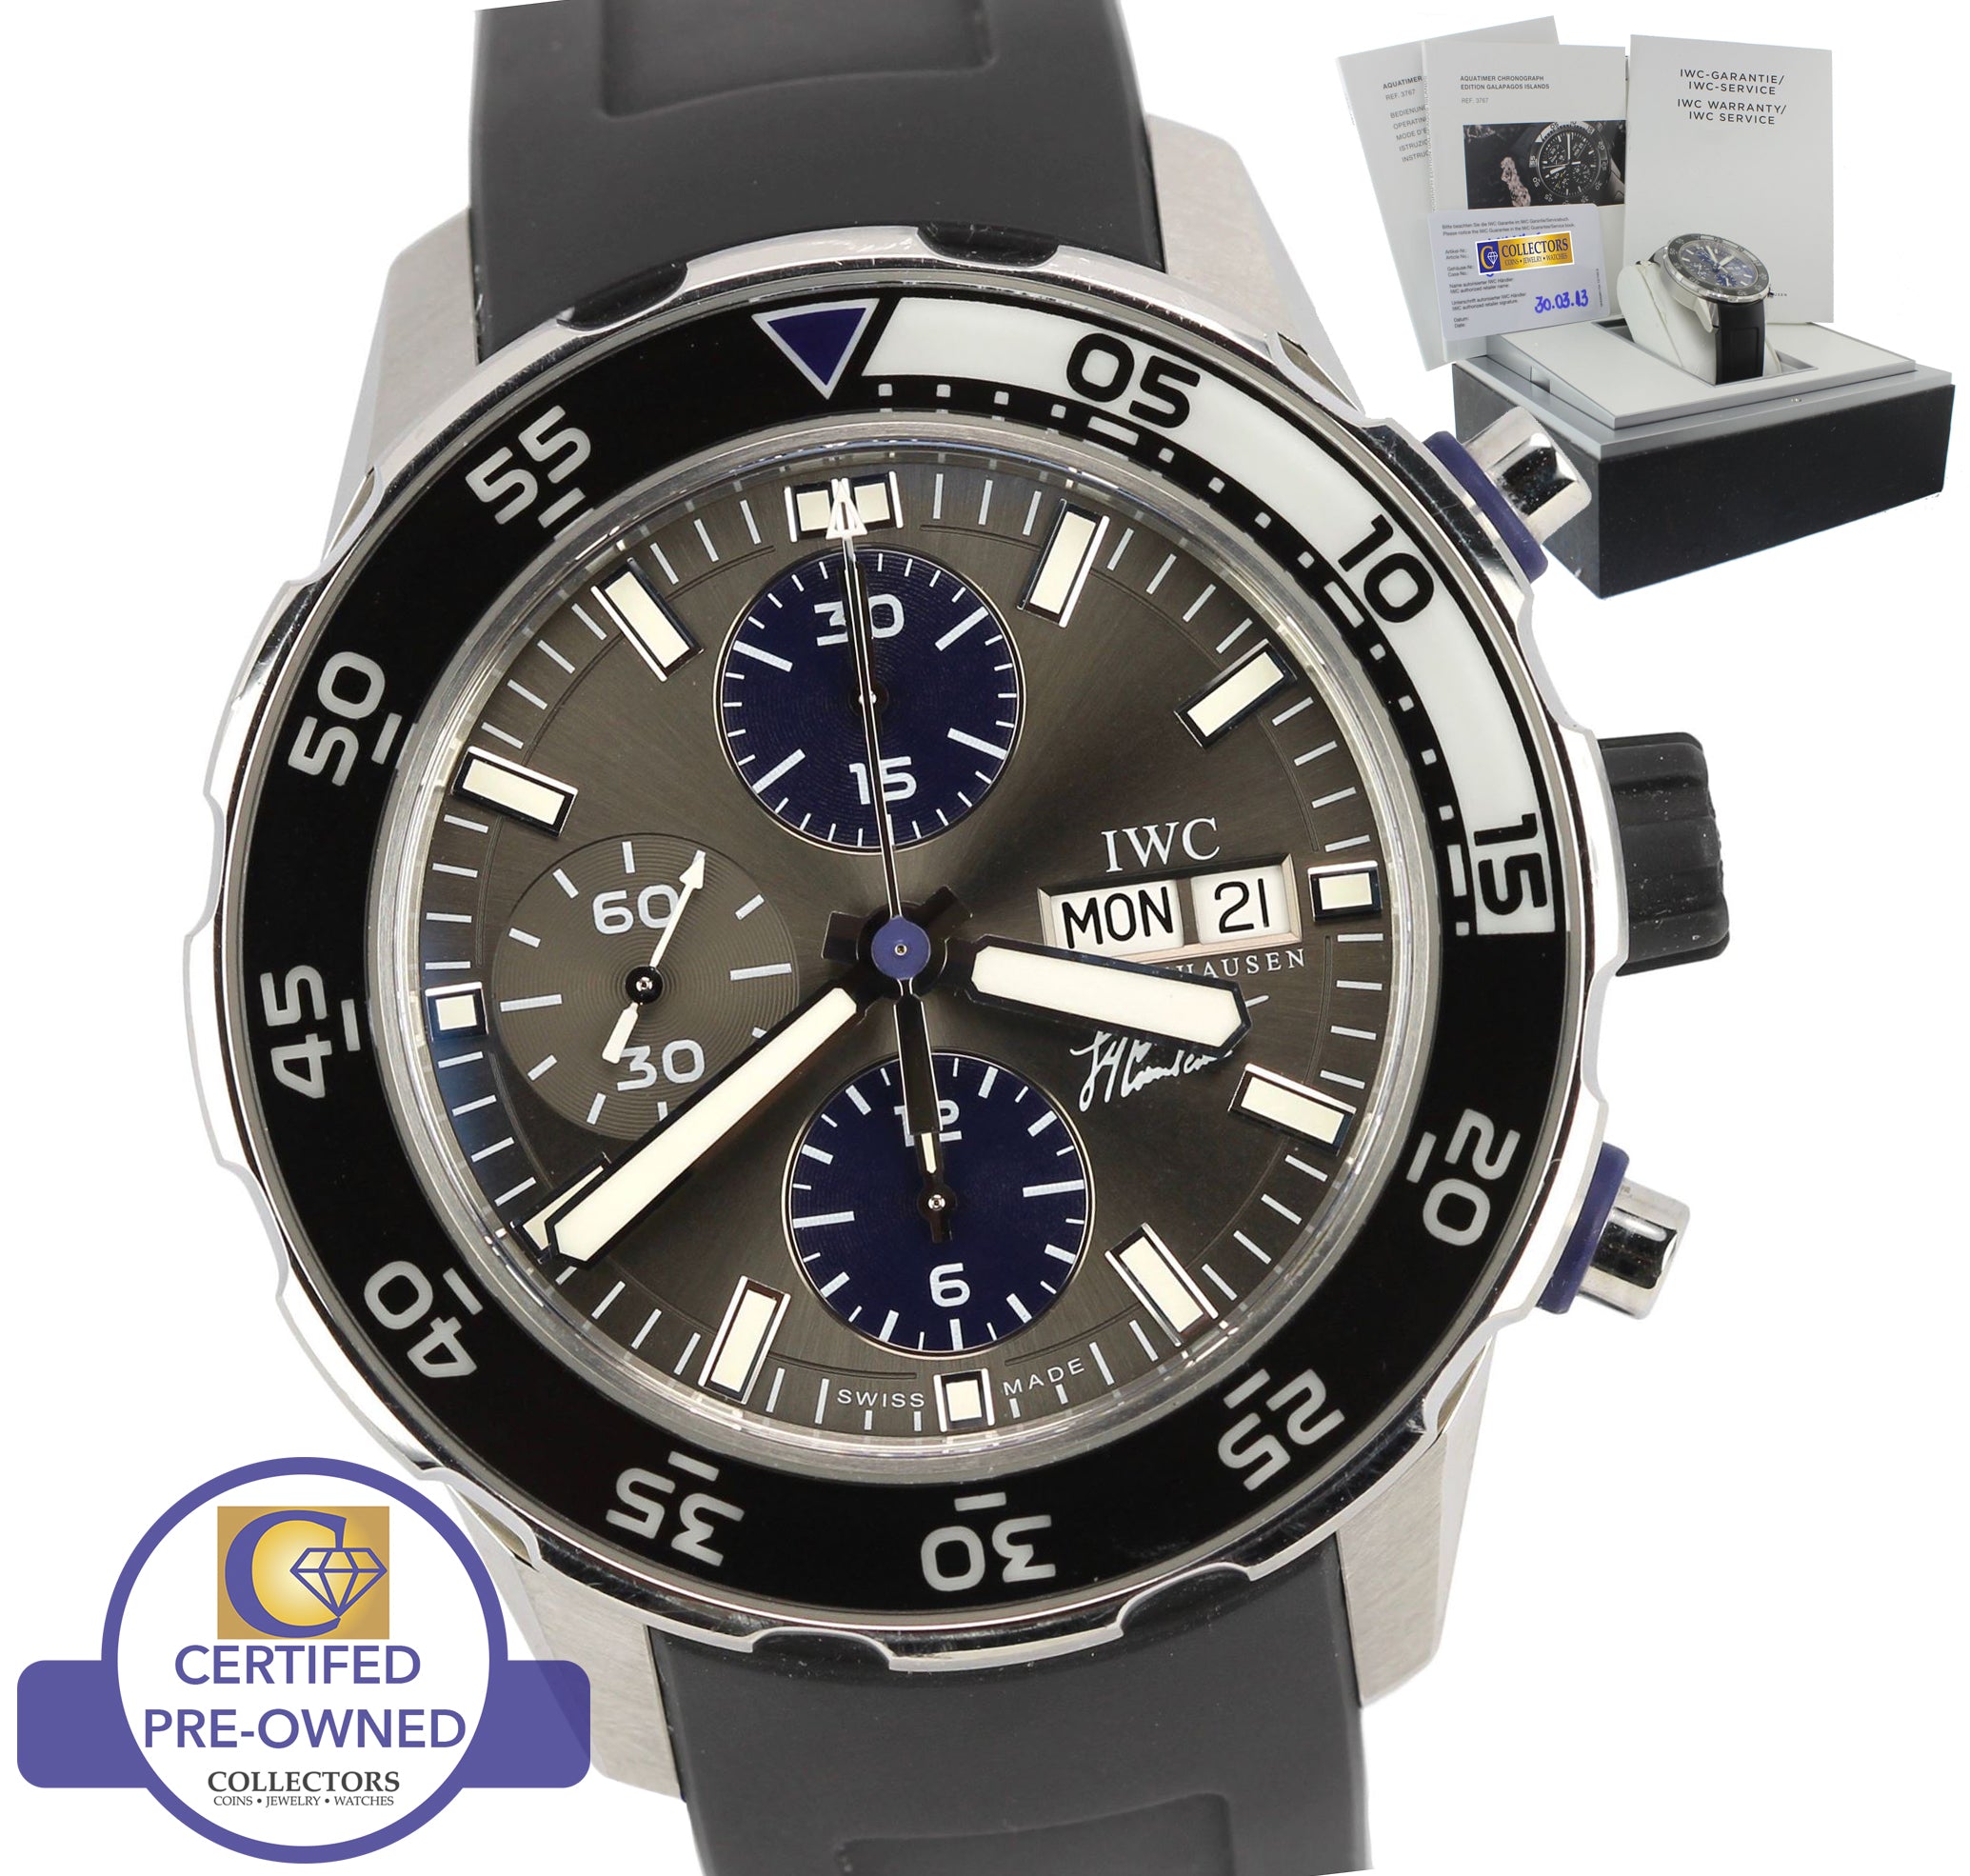 IWC Aquatimer Jacques J.Y. Cousteau Day Date Chronograph 44mm IW376706 3767-06